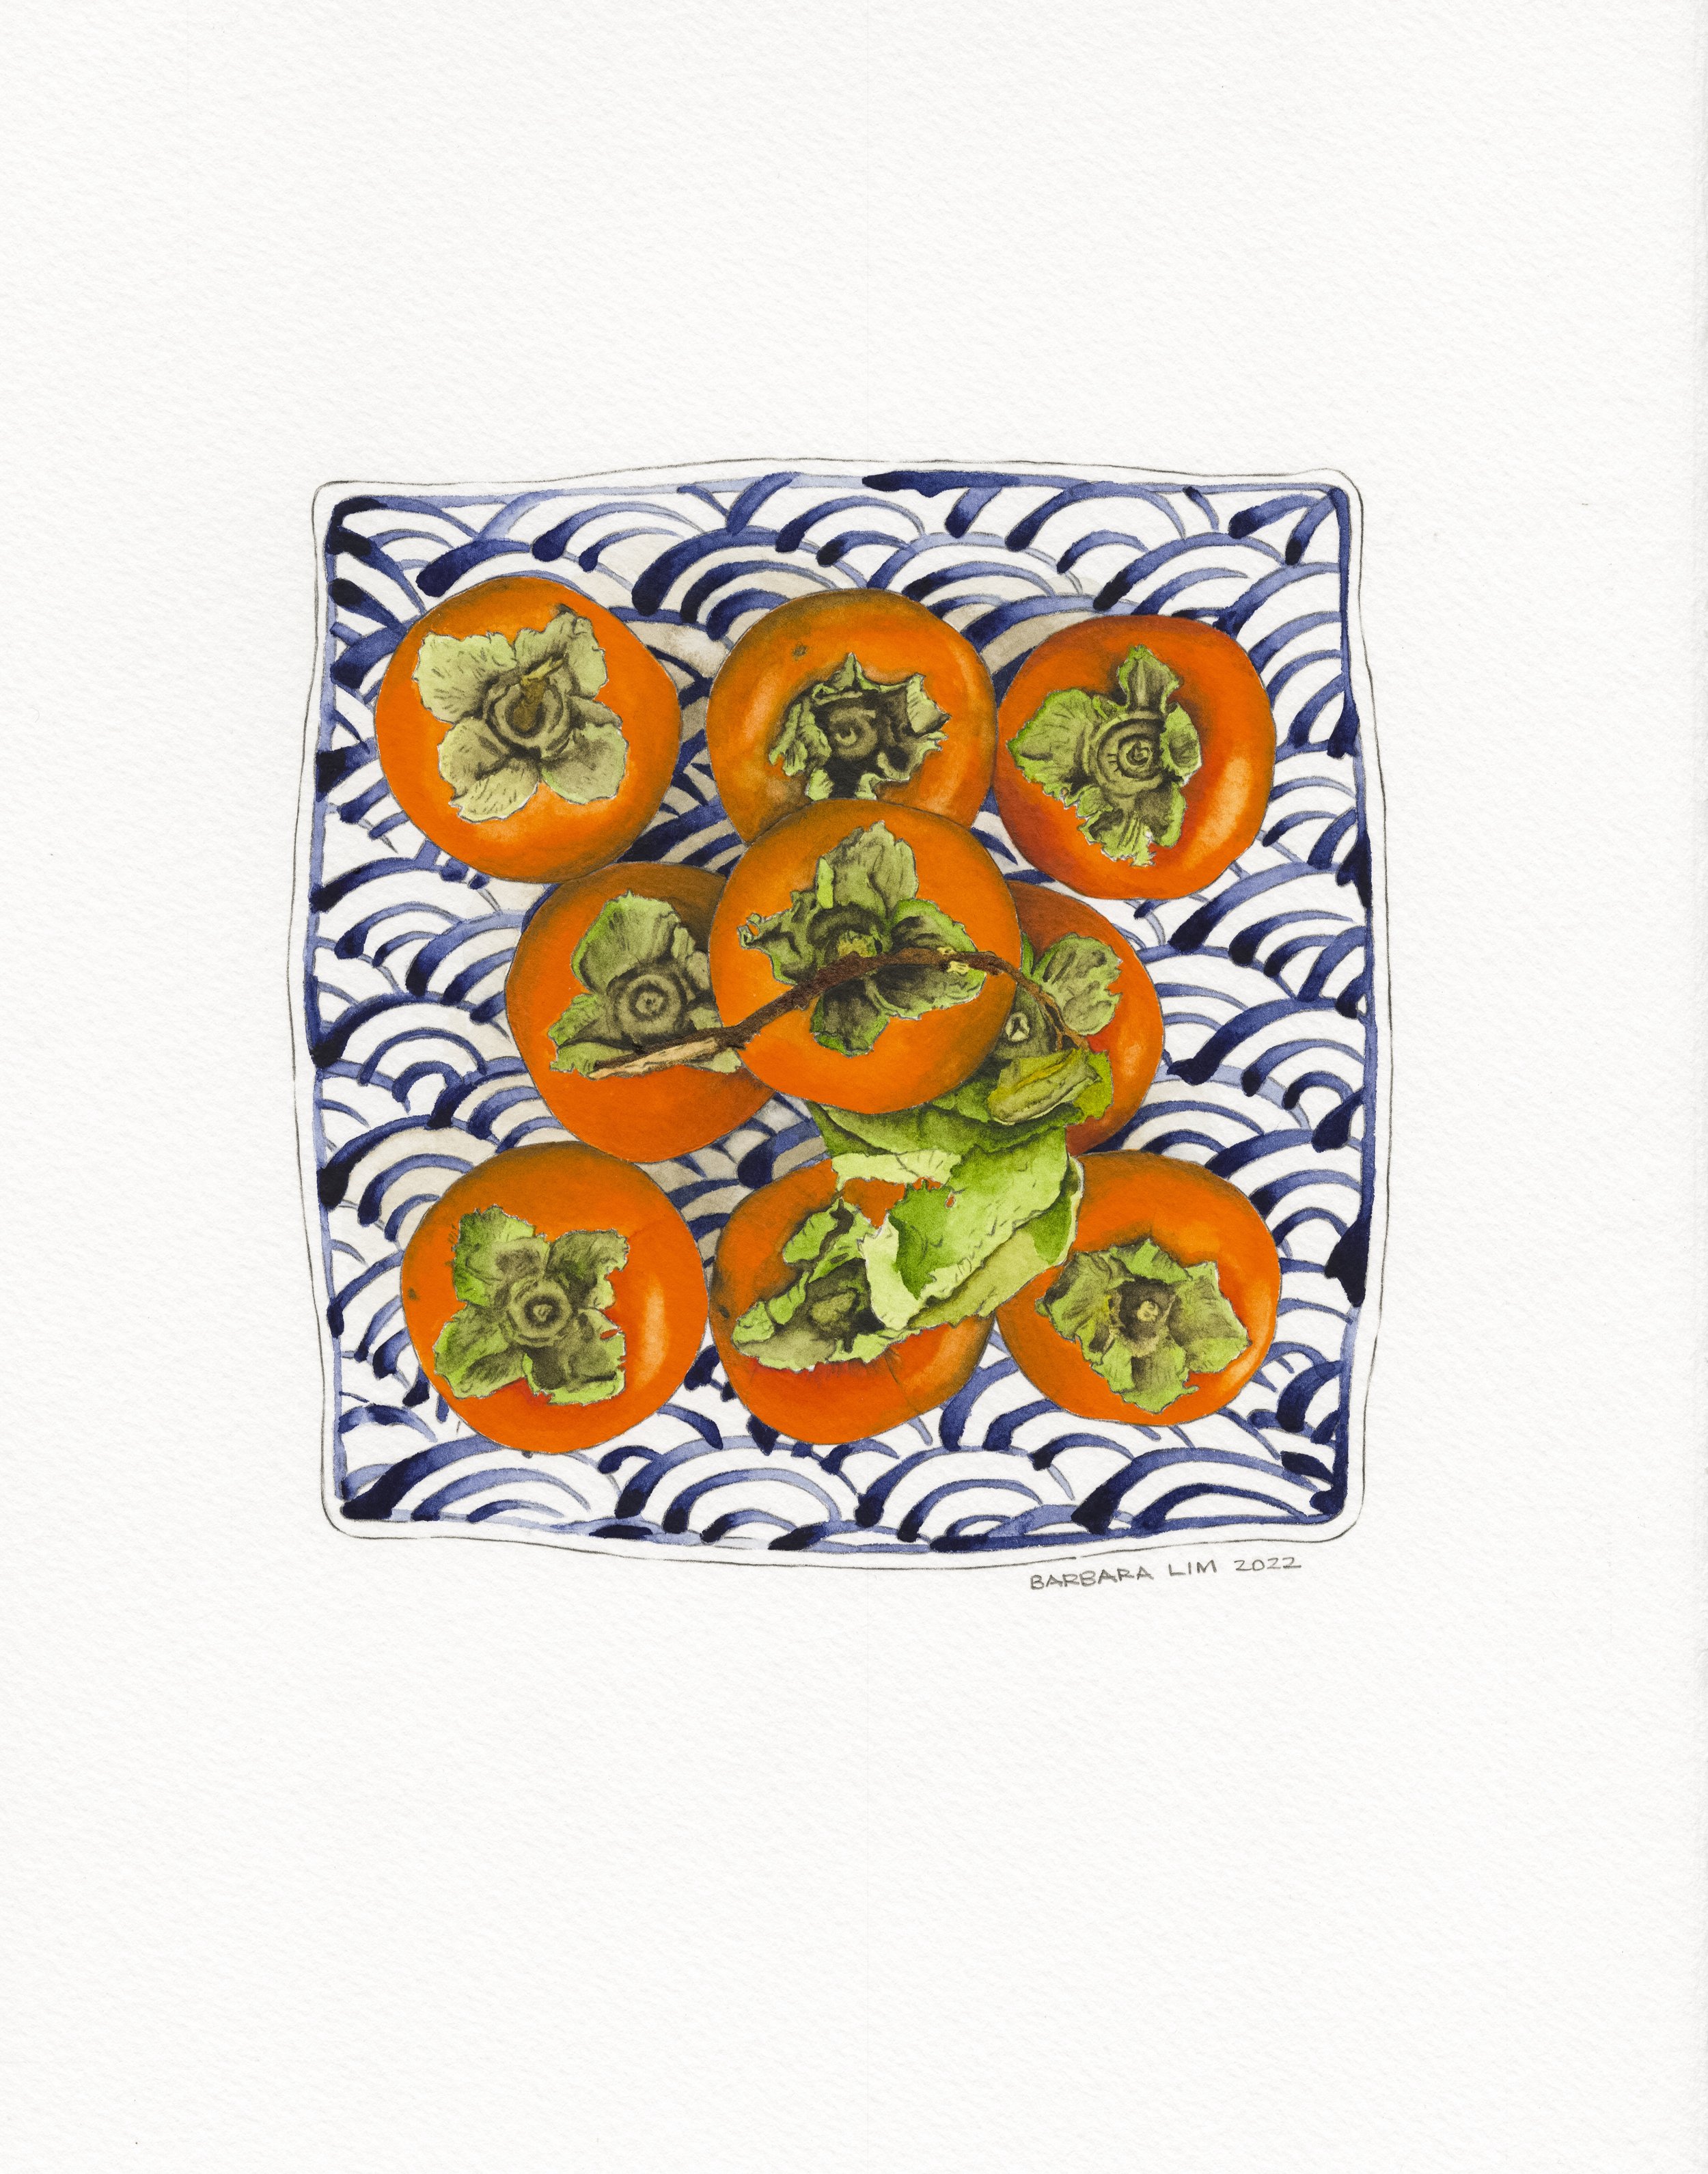 Persimmons from Grace by Barbara Lim